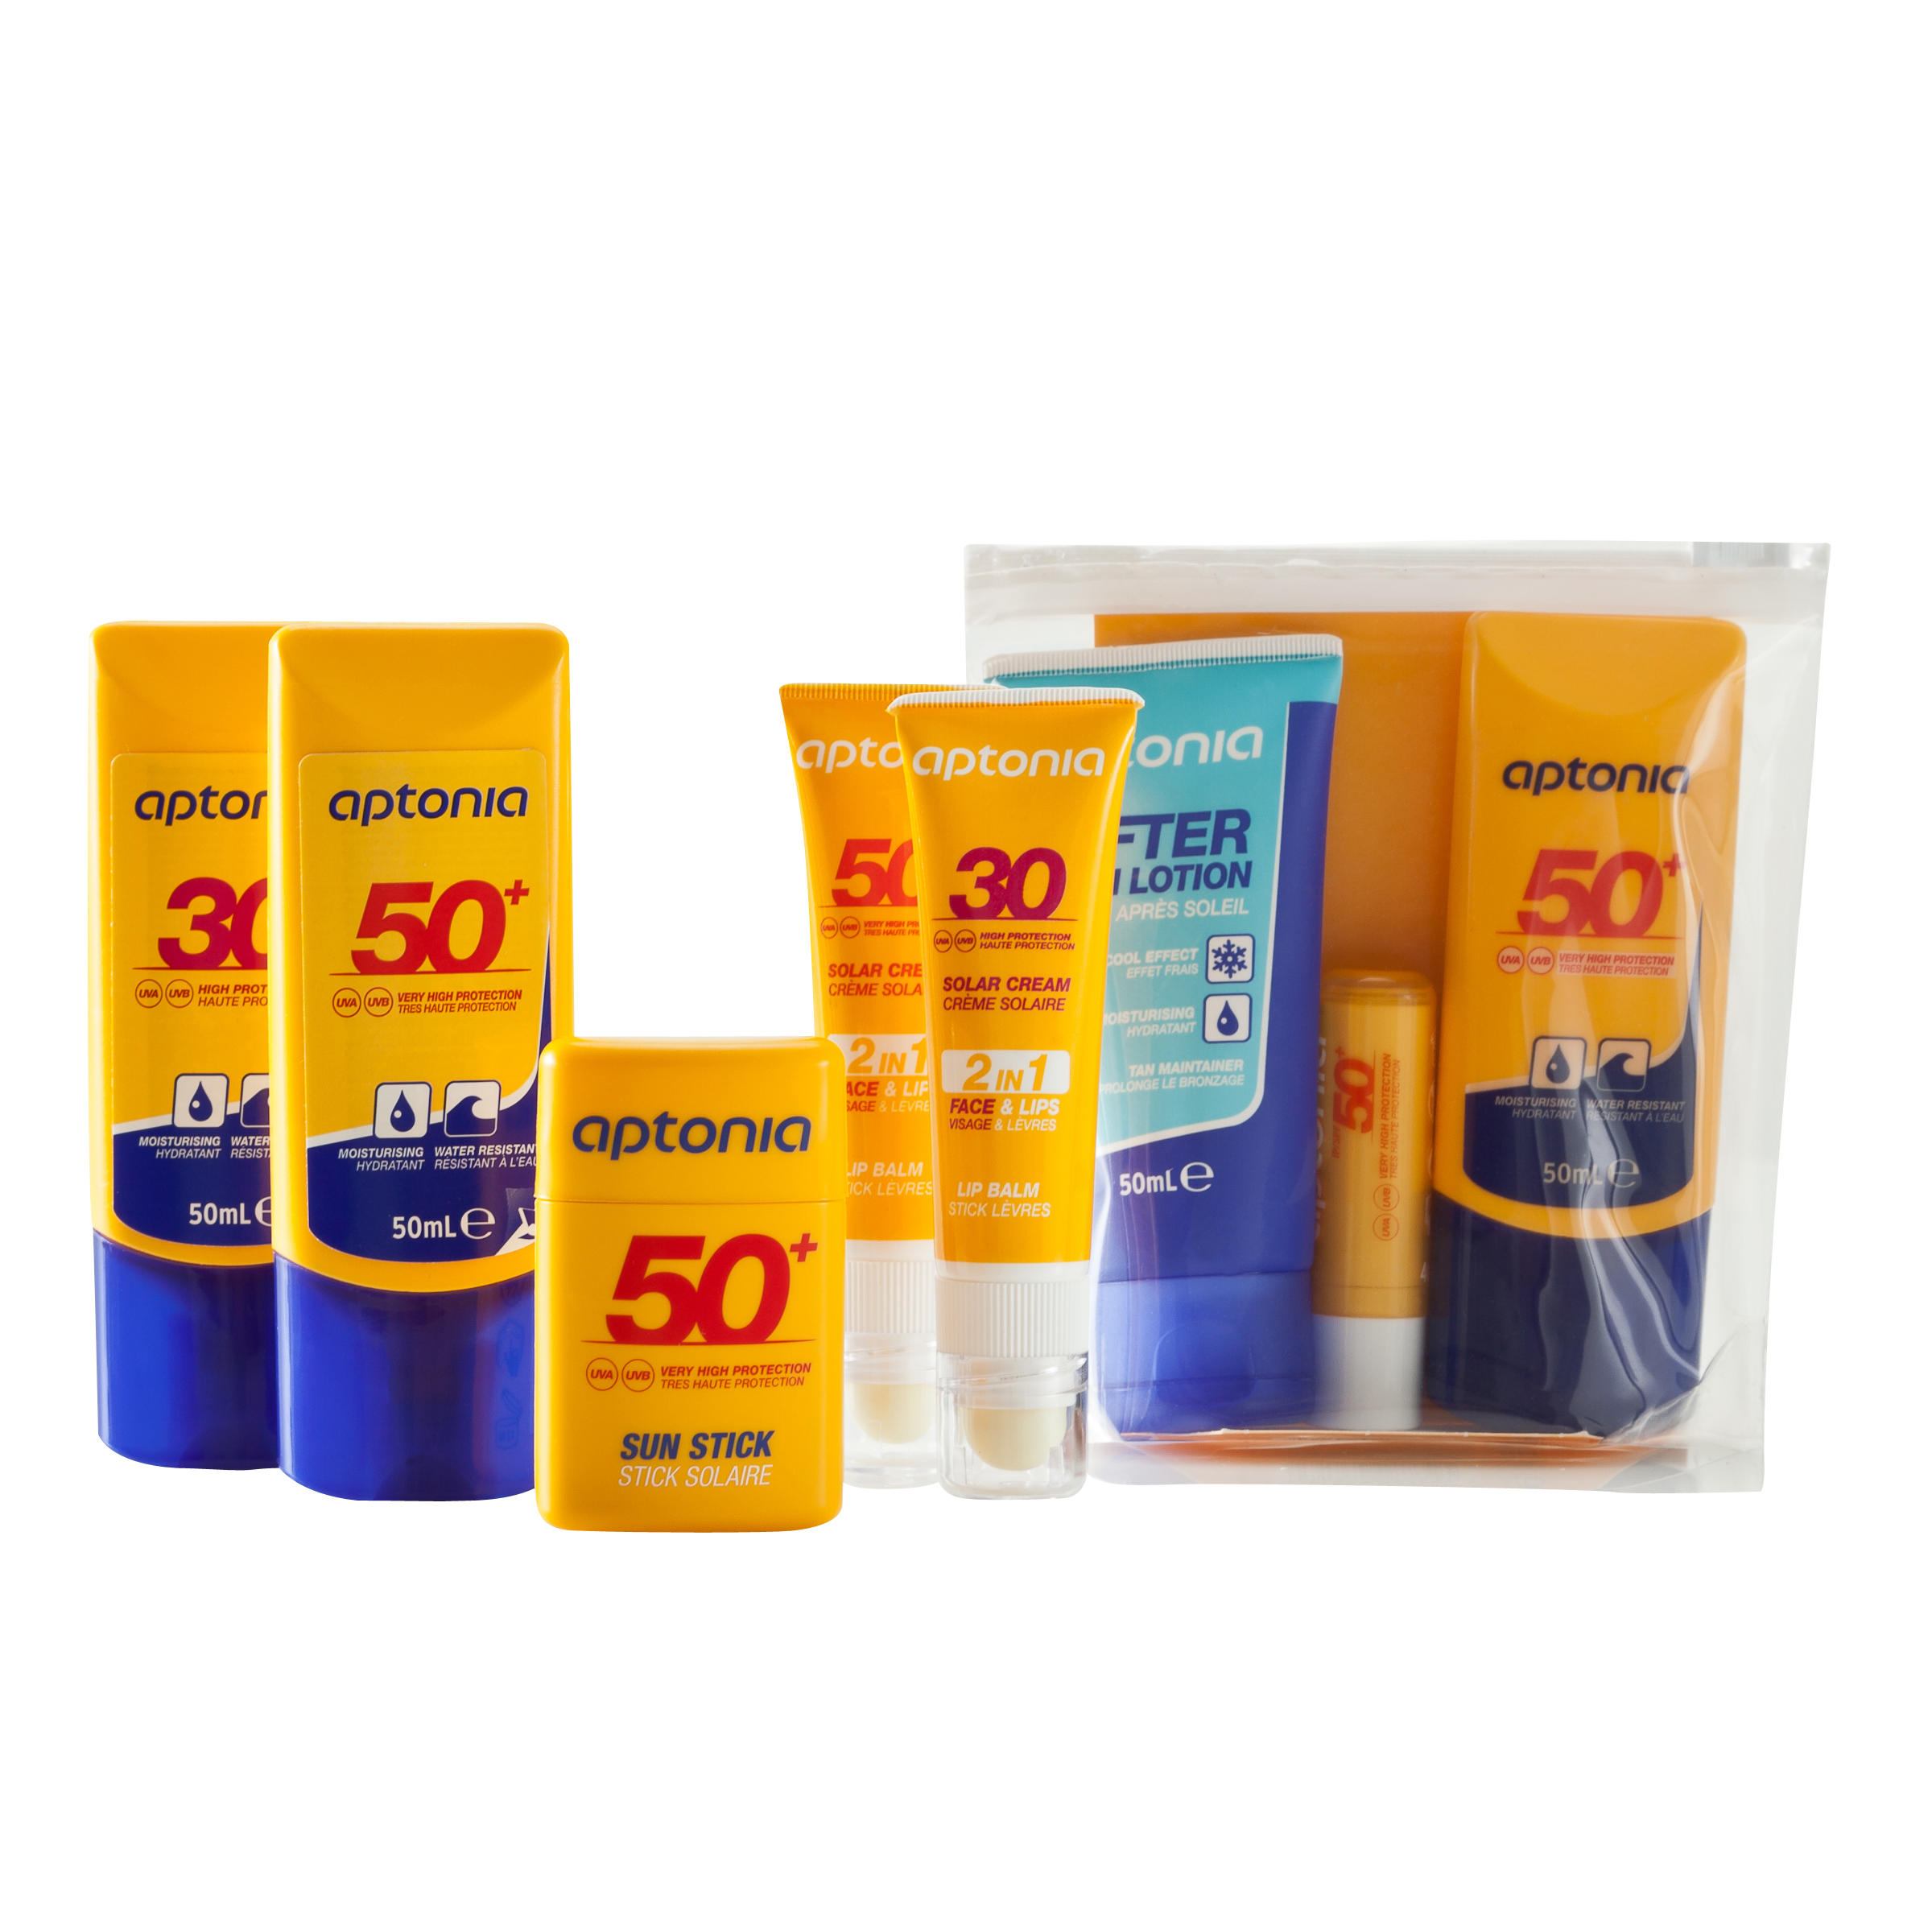 2-in-1 SPF 50+ sunscreen stick for face and lips 6/6